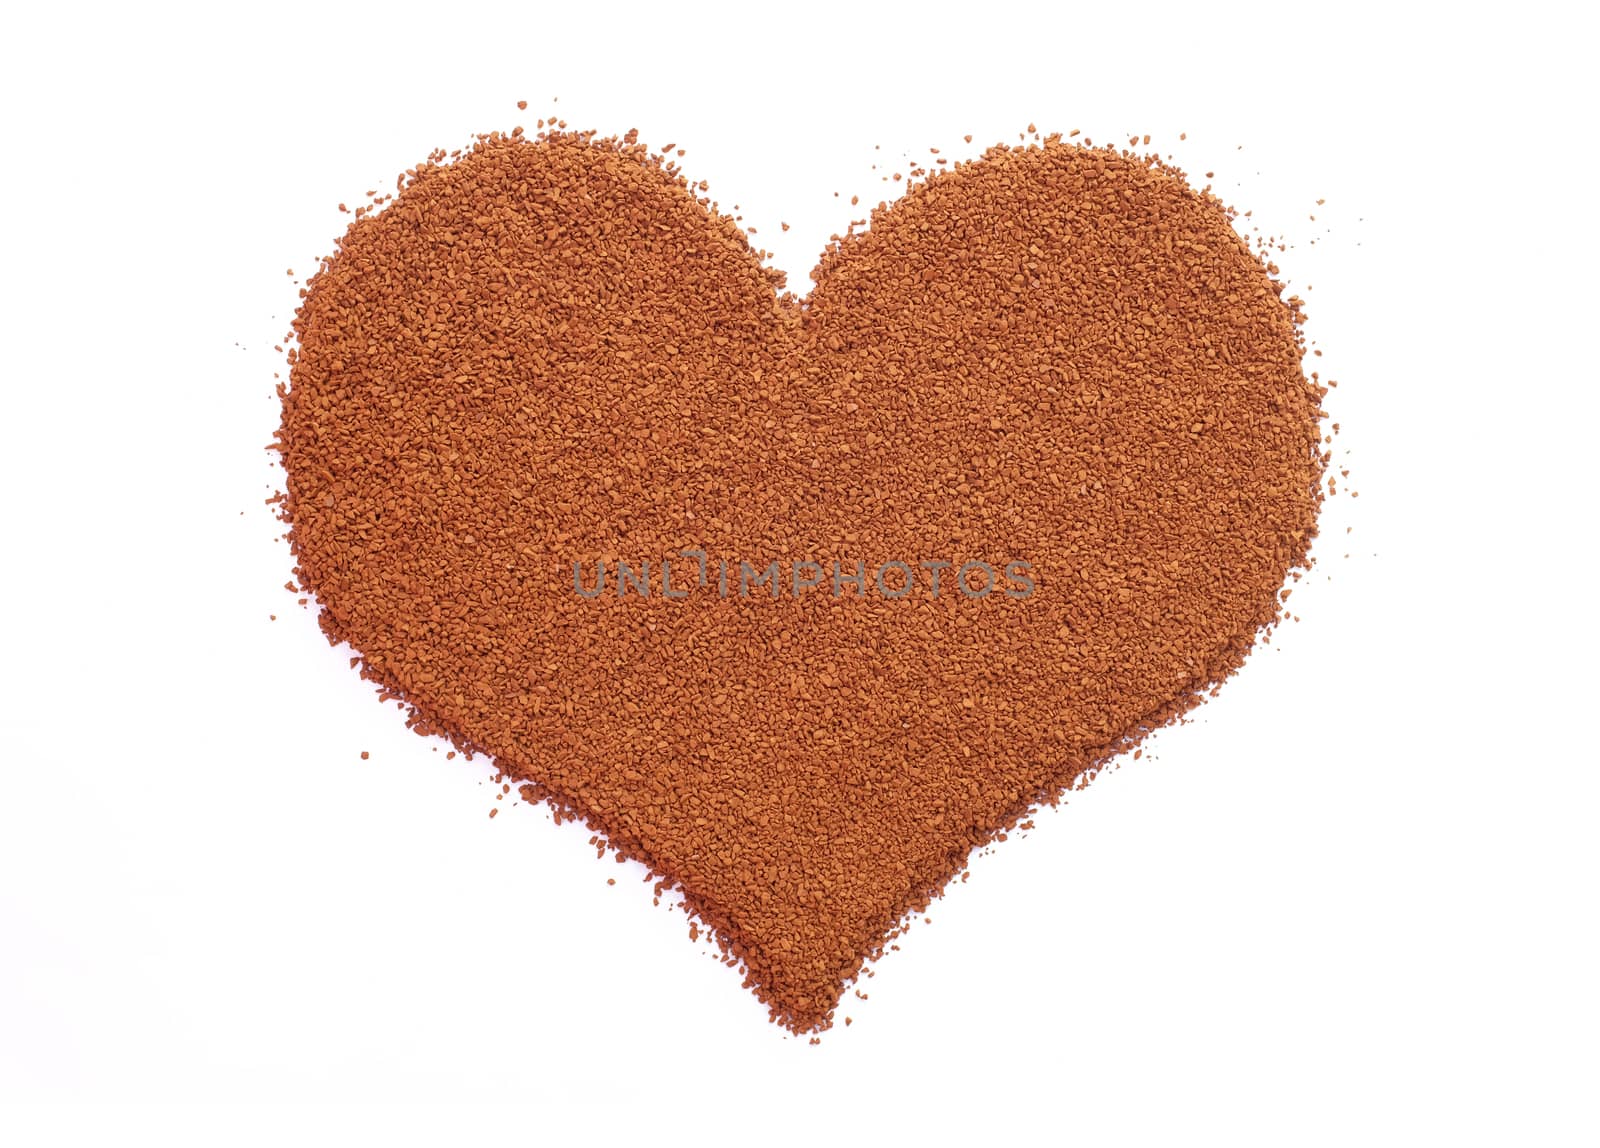 Instant coffee granules in a heart shape, isolated on a white background